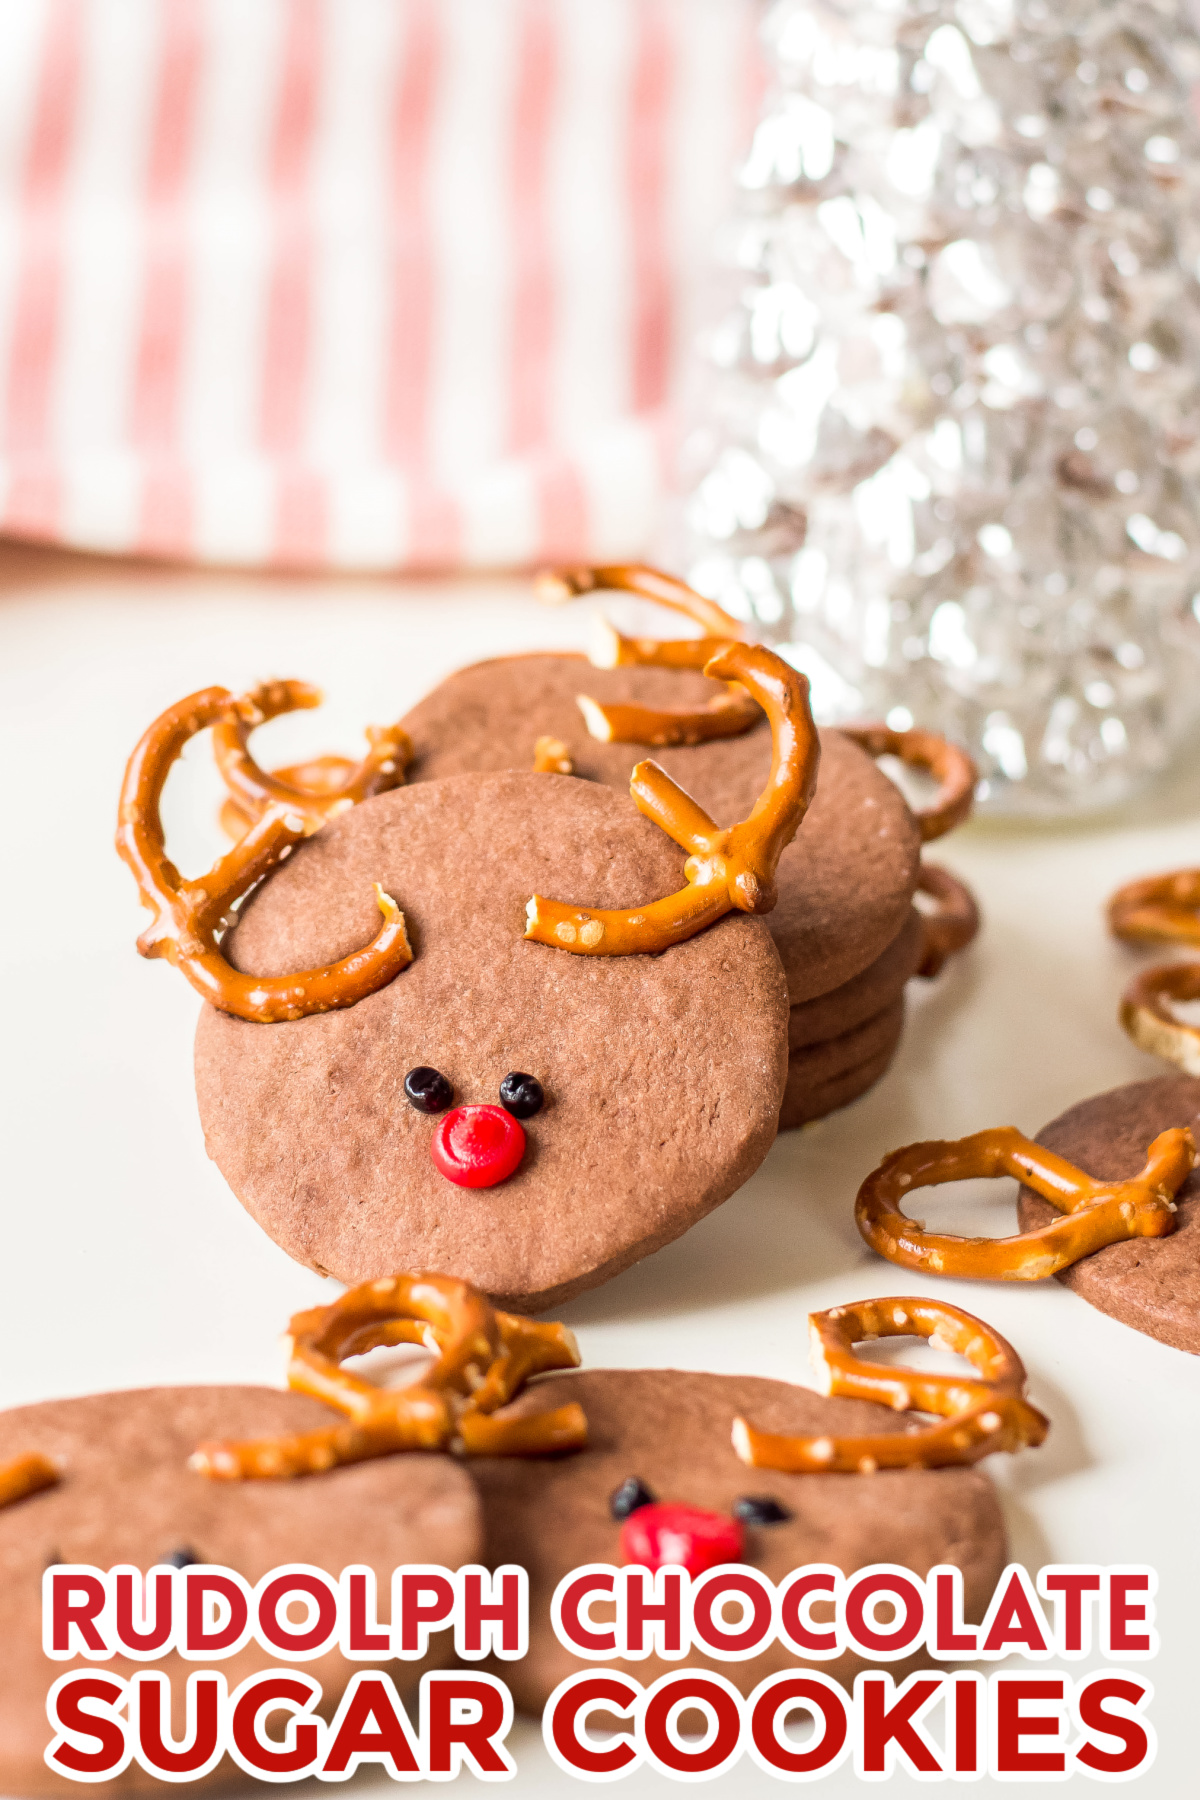 Find out how to make these delicious and festive Rudolph chocolate sugar cookies this Christmas with this easy sugar cookie recipe.